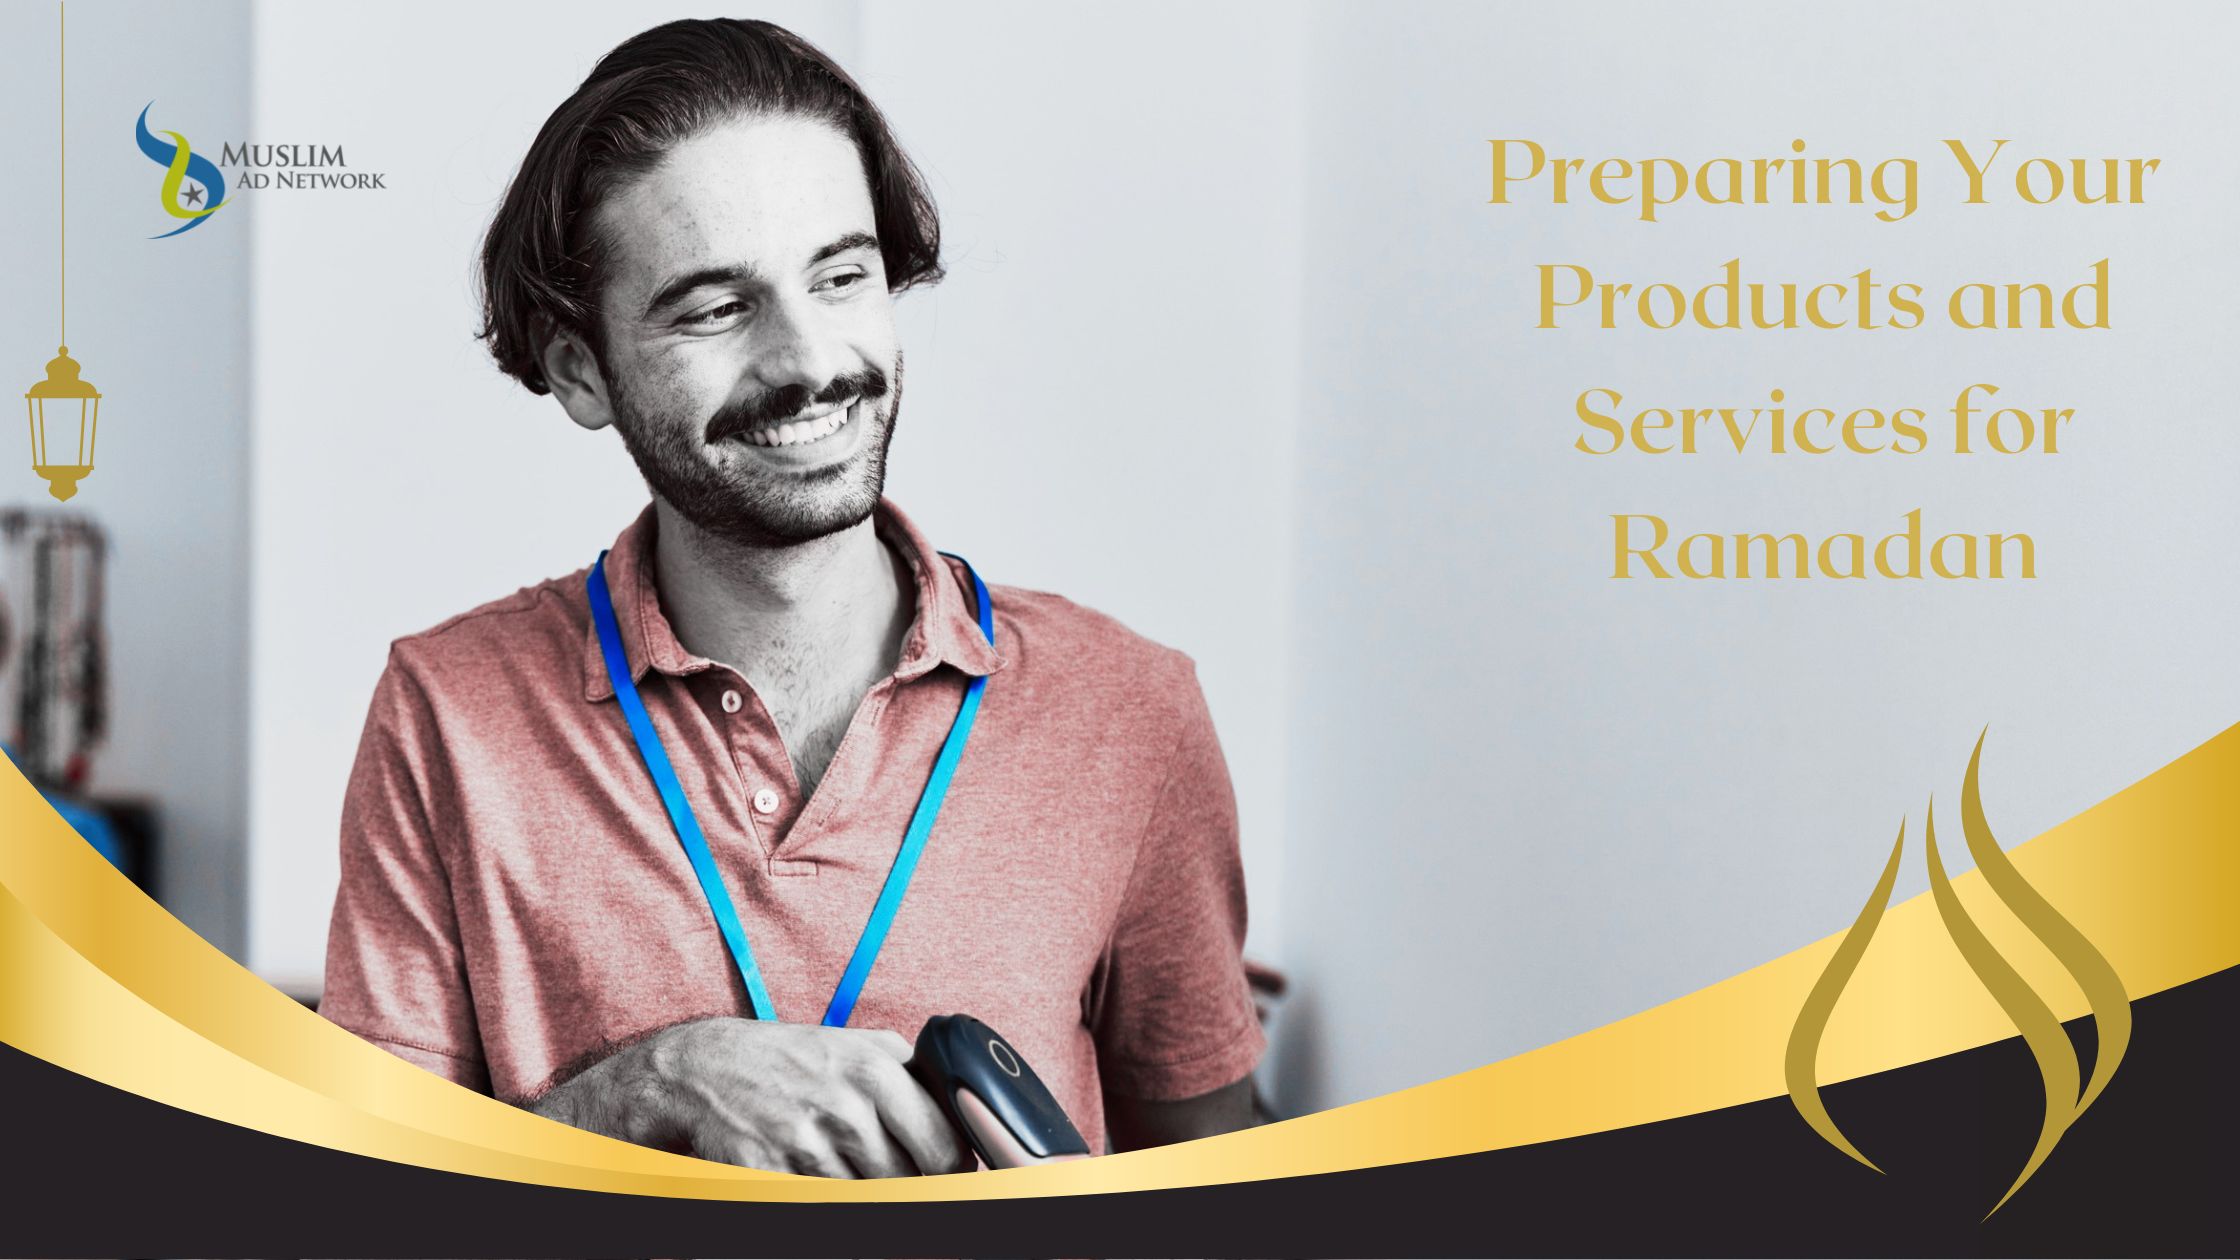 Preparing Your Products and Services for Ramadan